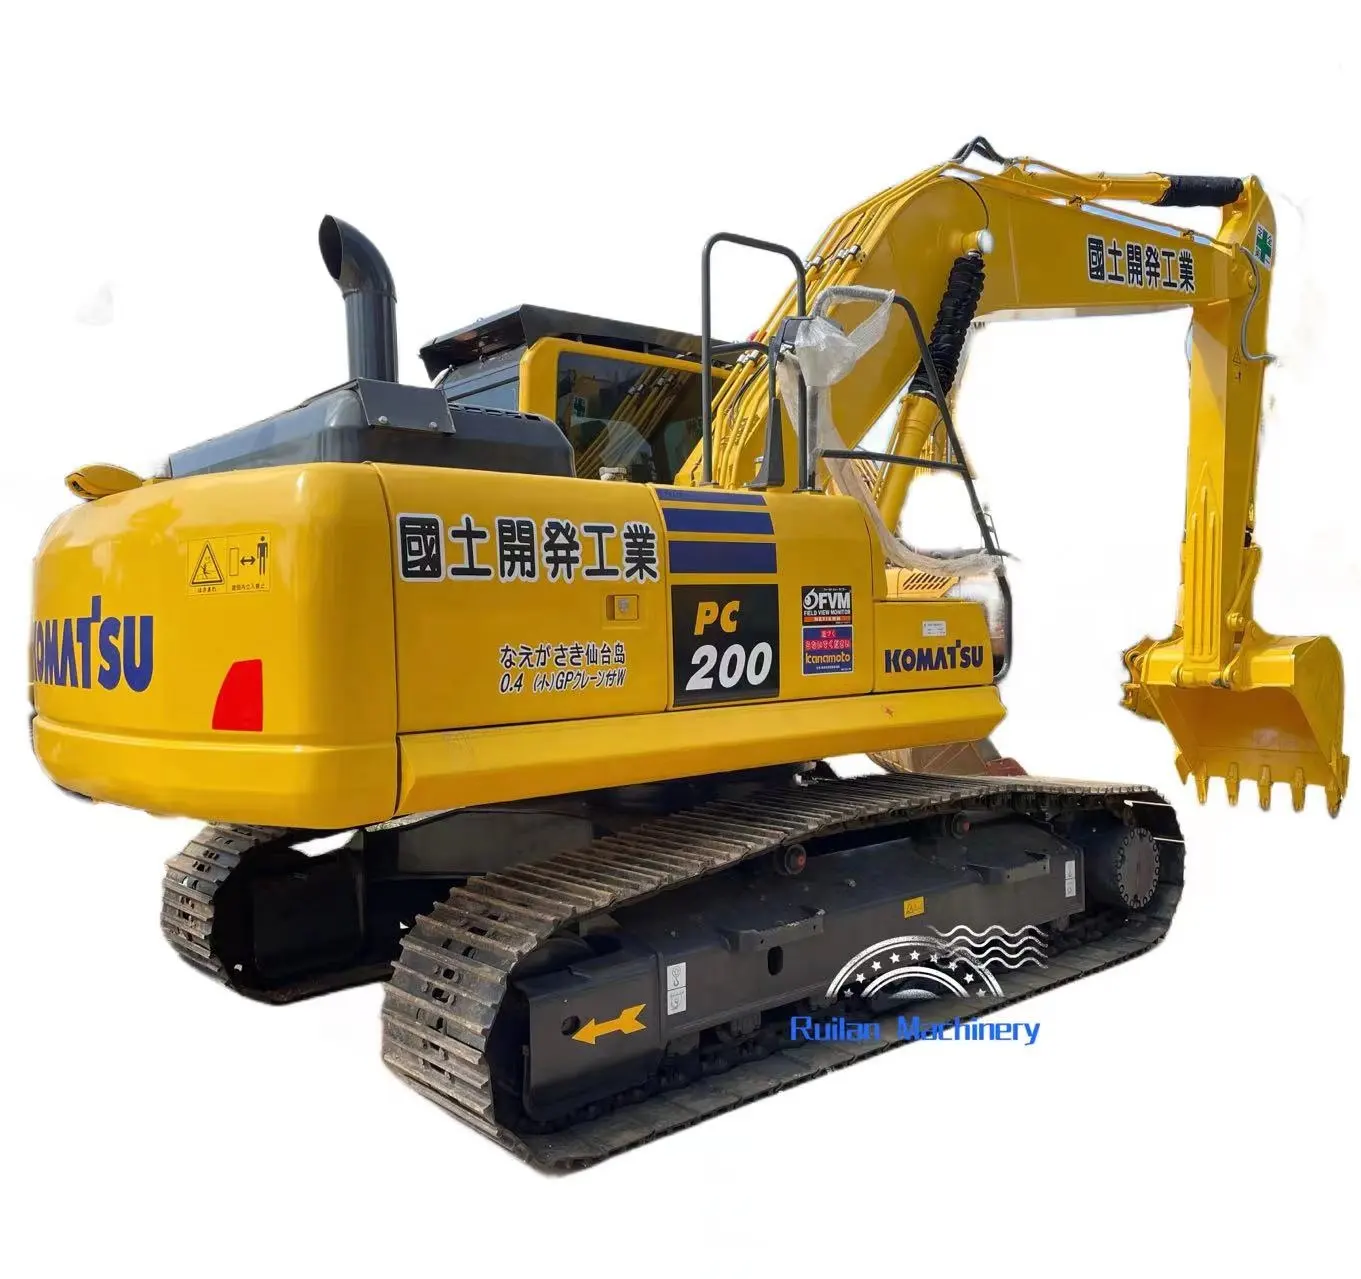 Excellent working 20 Ton Used Komatsu Pc200-7 Excavator for sale in China